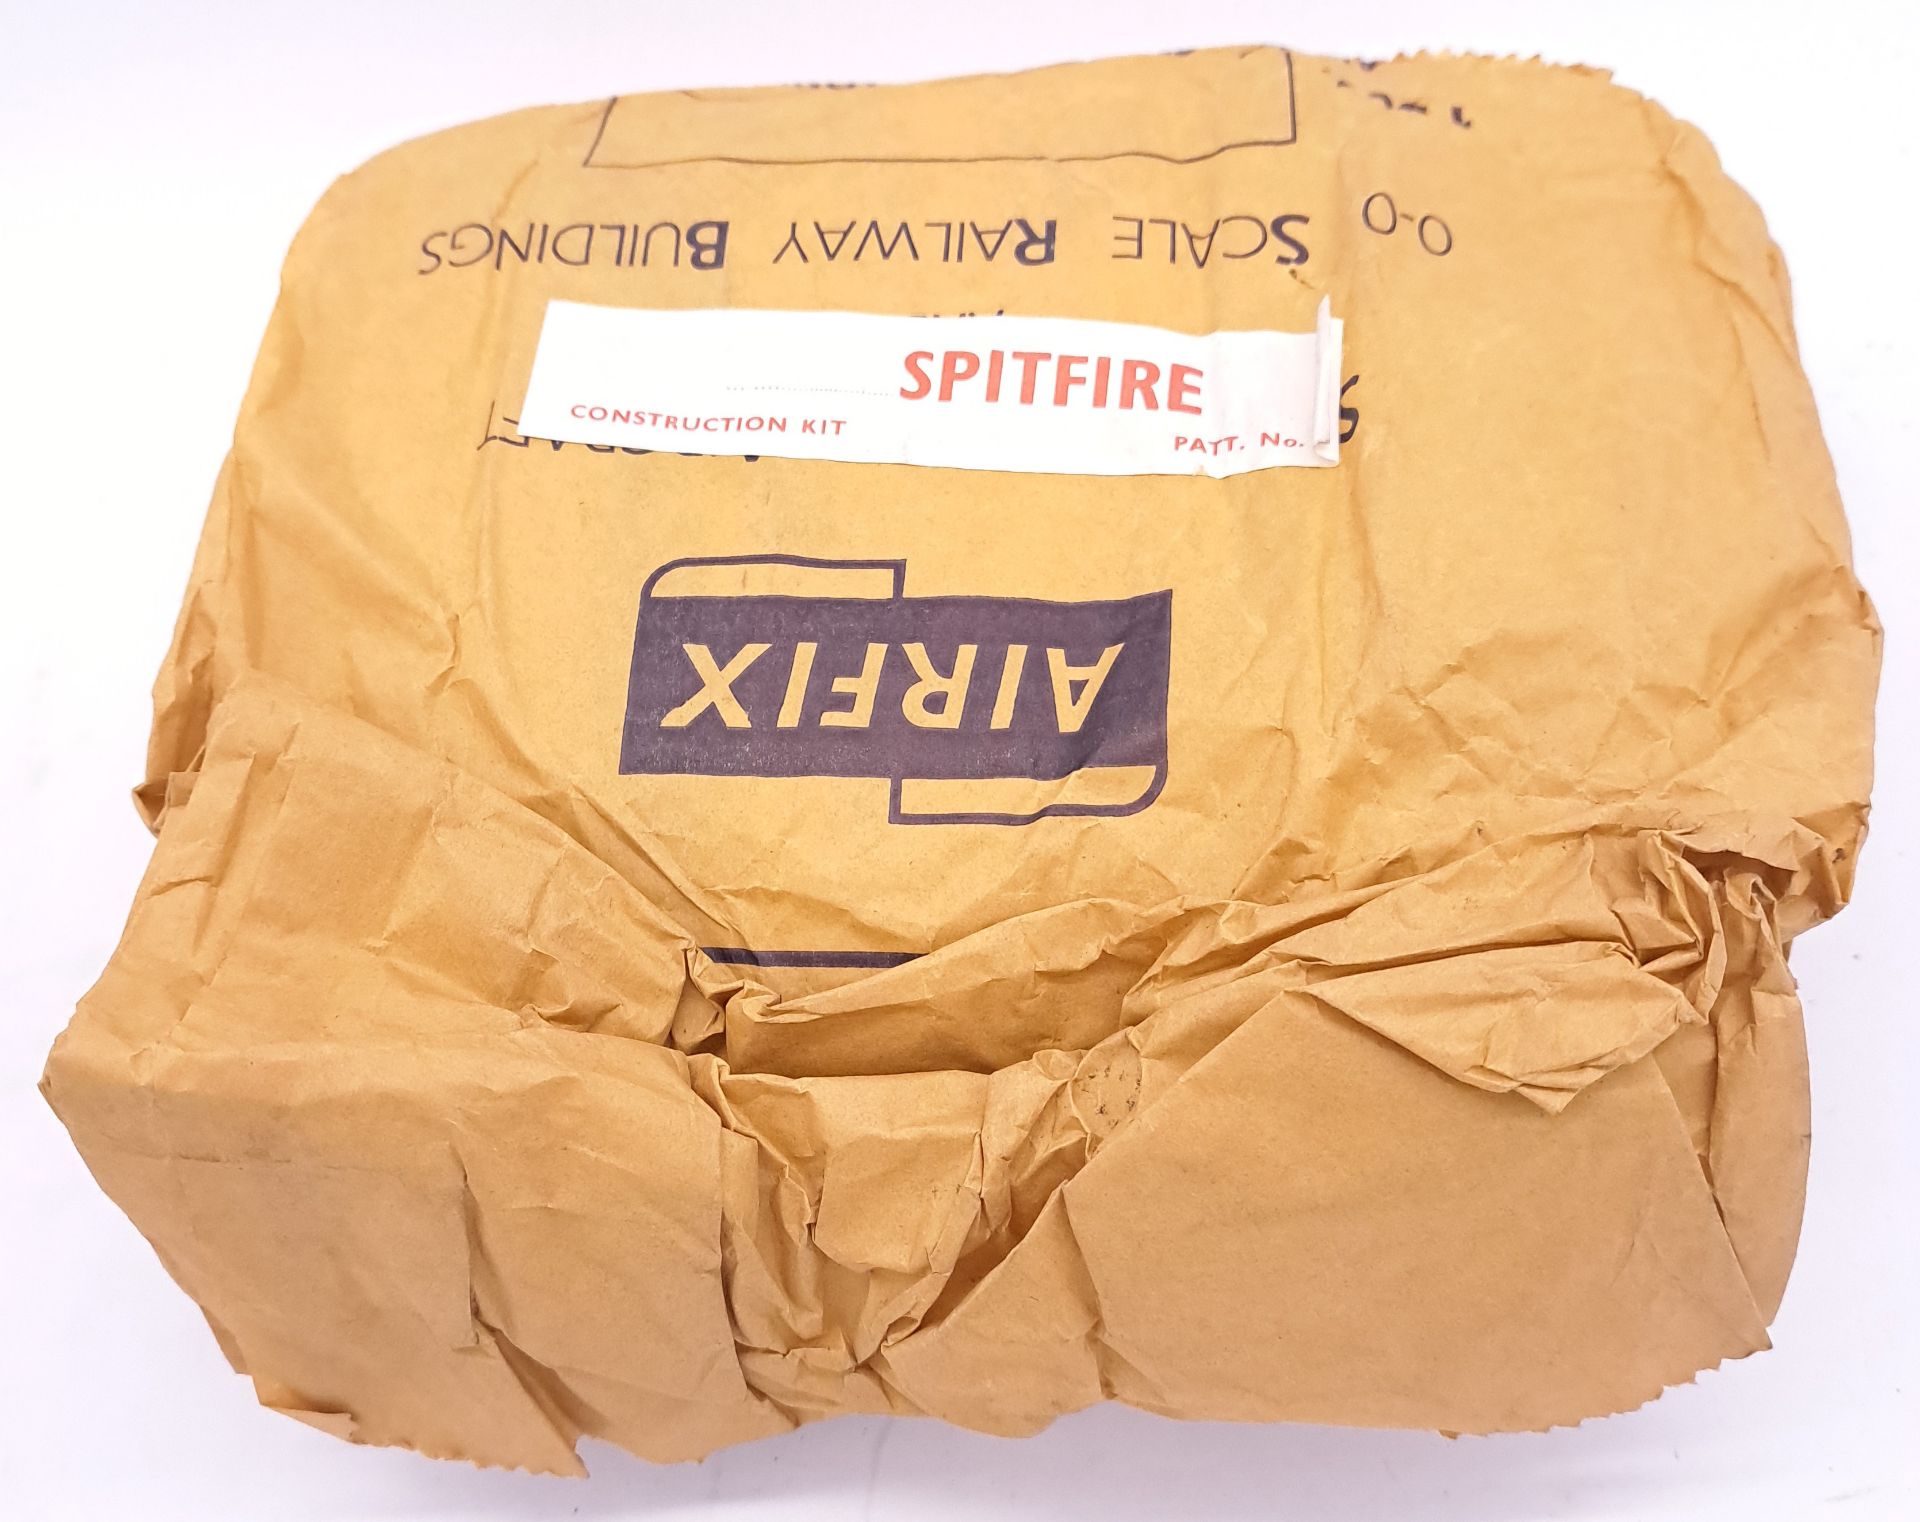 Airfix c1960’s ORIGINAL TRADE BAG complete with Bagged (possibly Type3) “Spitfire” Kits - Image 2 of 7